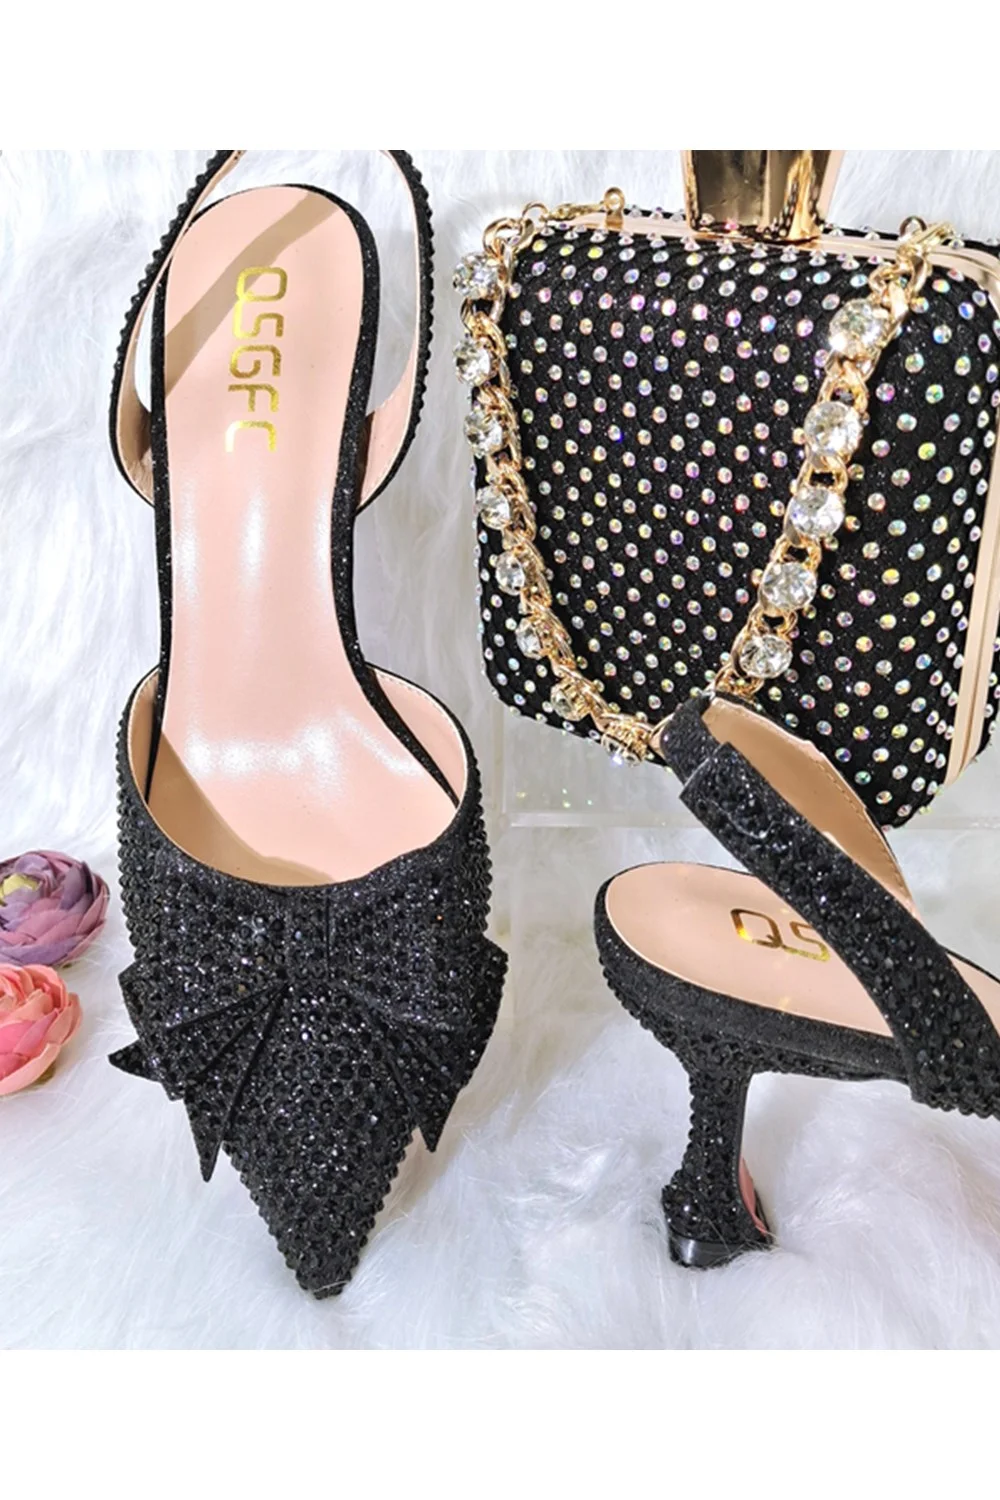  2023 New Fashion Full Of Crystal Decoration Style Rainbow Glass Heel Friends Party Shoes Ladies Shoes And Bag For Party 928-0